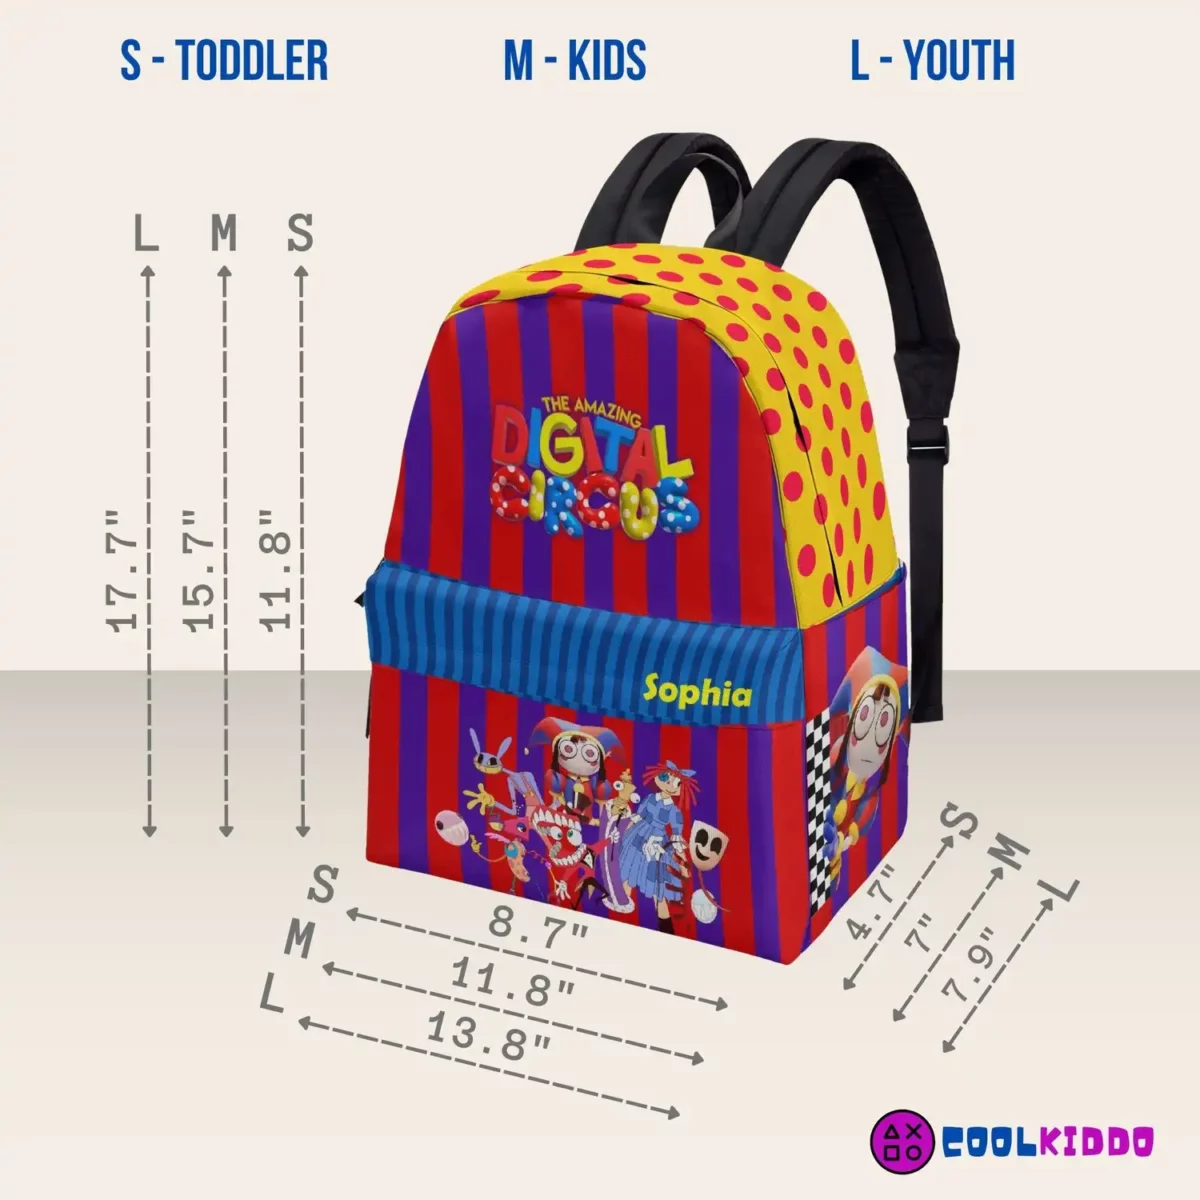 Amazing Digital Circus All-Over-Print Canvas Backpack for kids. Three Sizes School bag Cool Kiddo 20